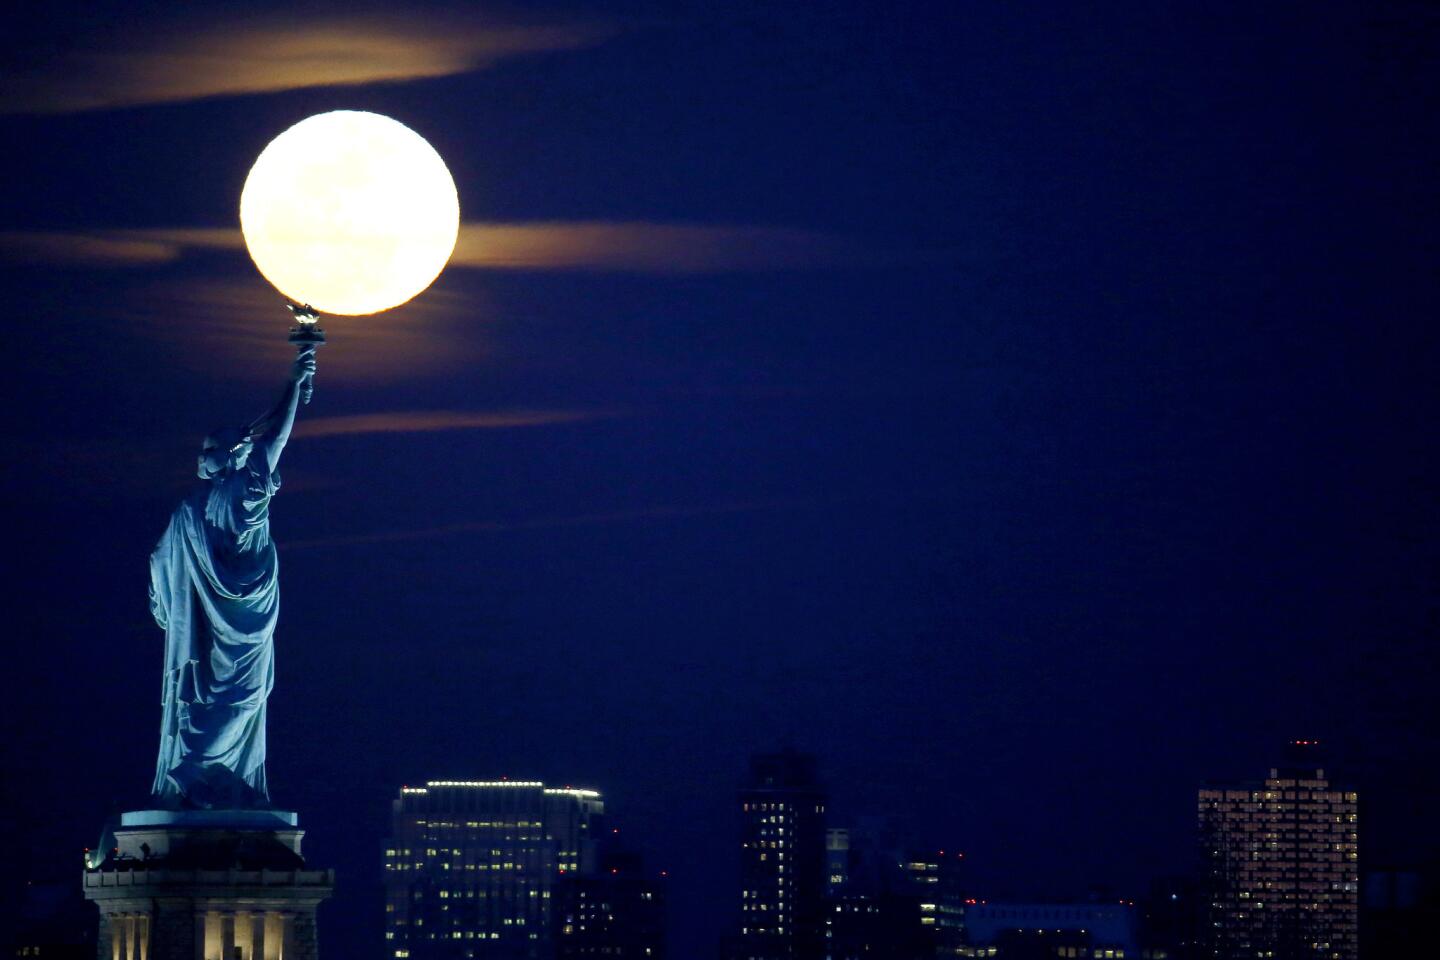 A full moon rises over the Statue of Liberty seen from the Port Liberte neighborhood of Jersey City, N.J.